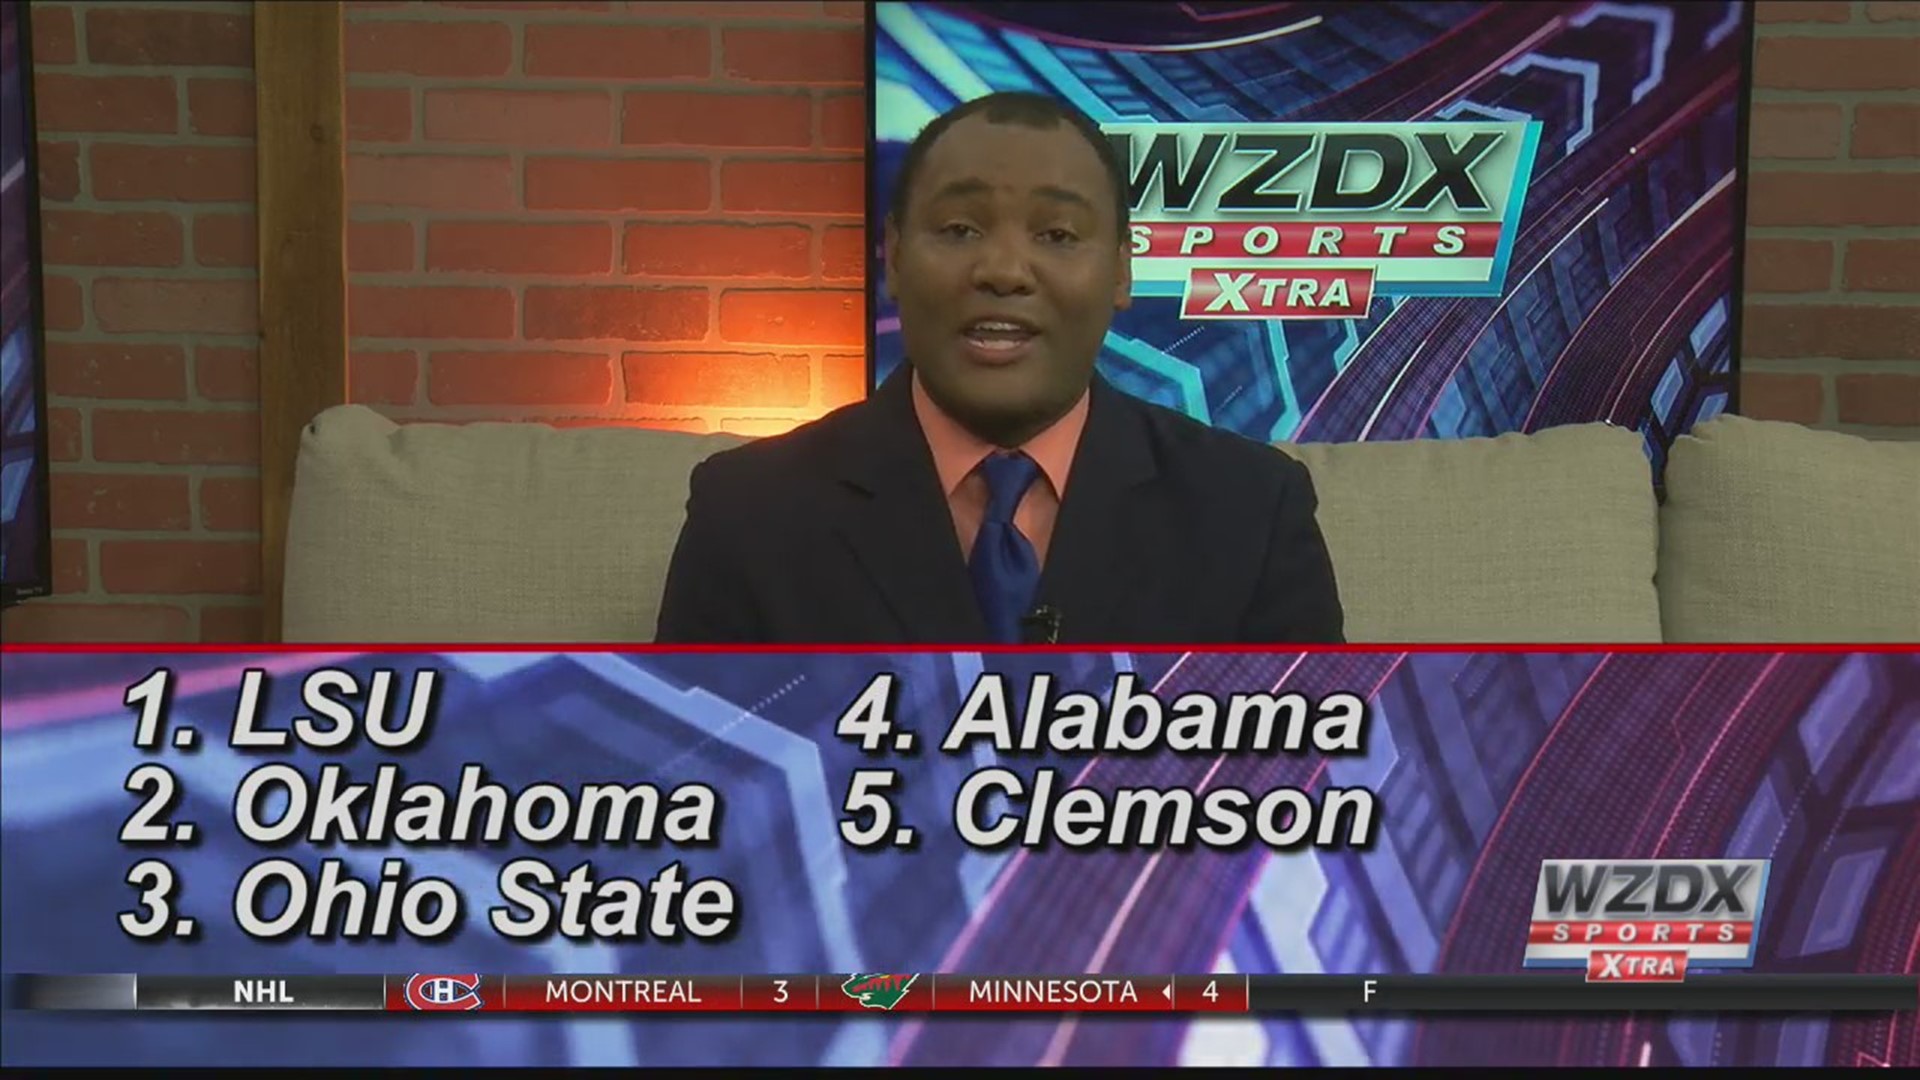 The 1st College Football Playoff Rankings will be released in the upcoming weeks. Sports Director Mo Carter decided to share his top 5 teams so far this season.